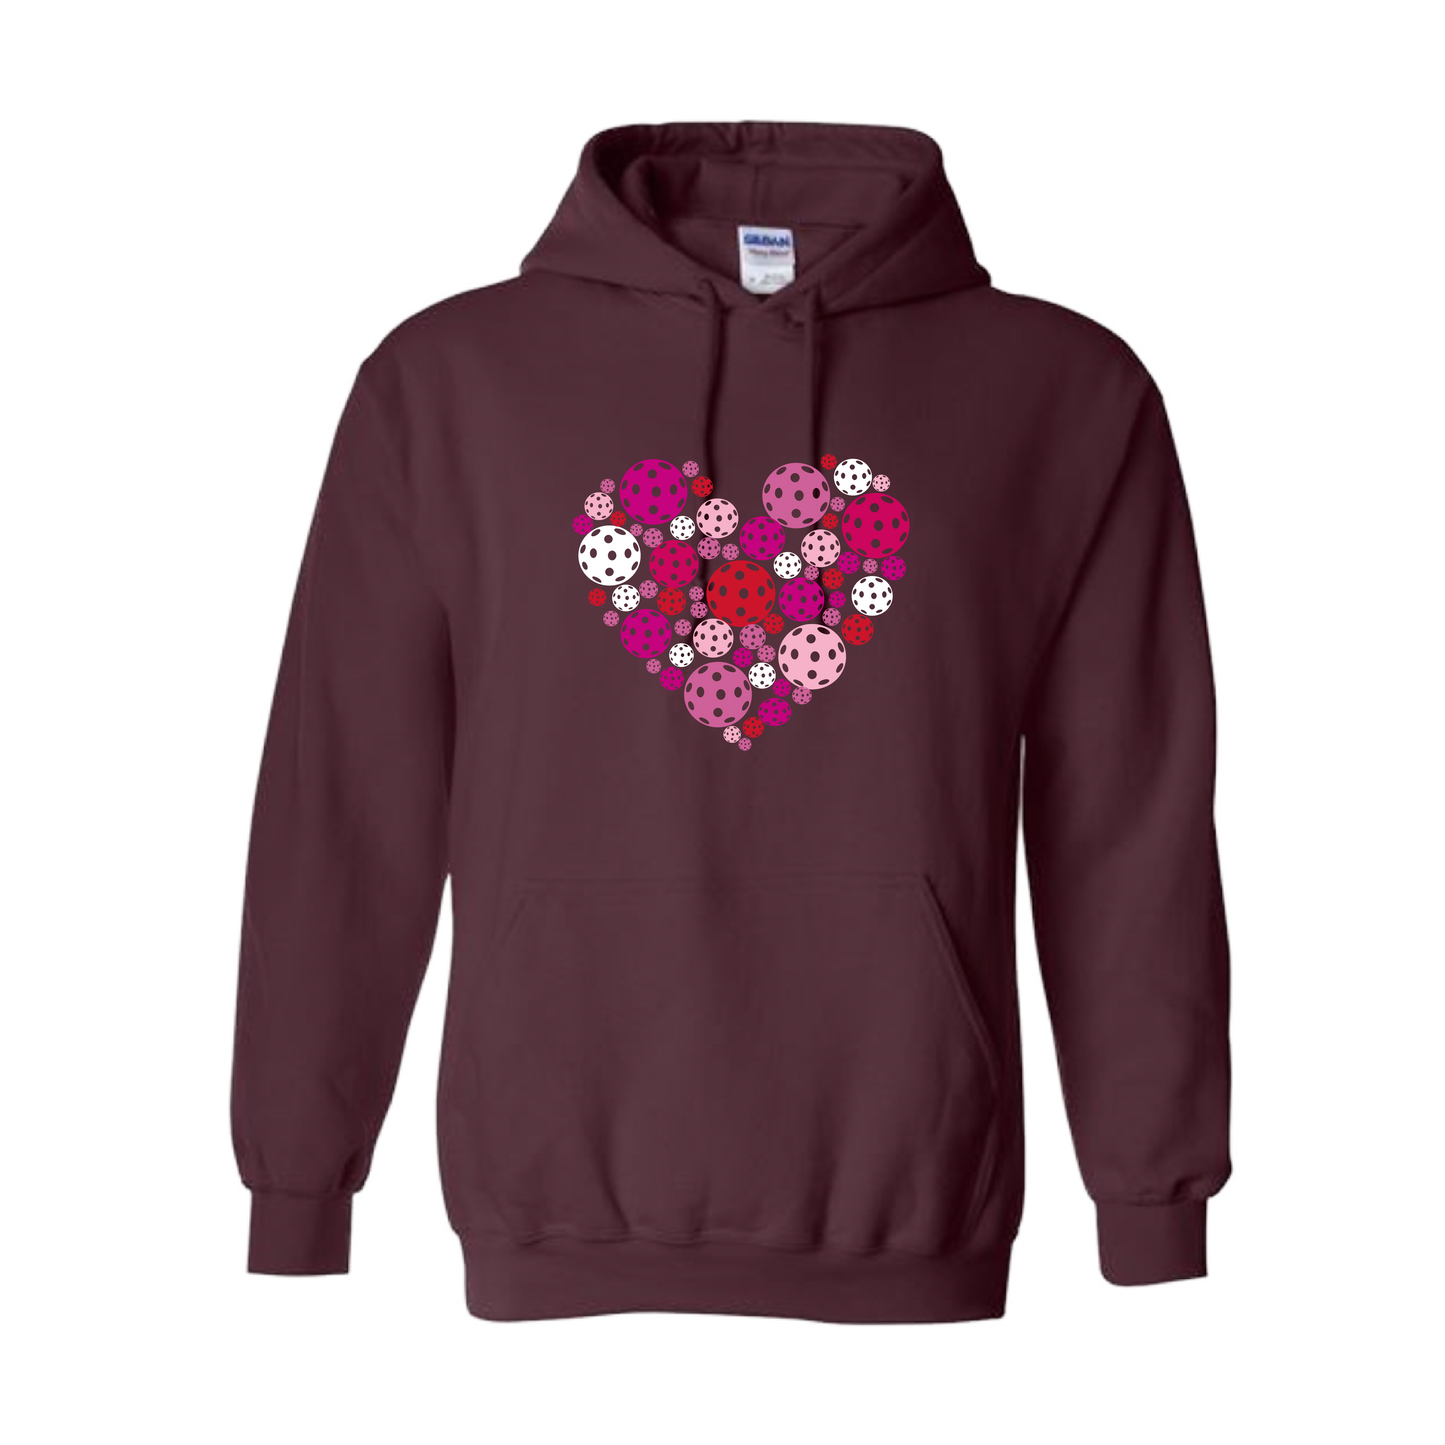 This unisex hooded sweatshirt combines comfort and breathability, featuring a moisture-wicking, double-lined hood and front pouch pocket. It's perfect for staying warm on the Pickleball courts while showing off a unique design.